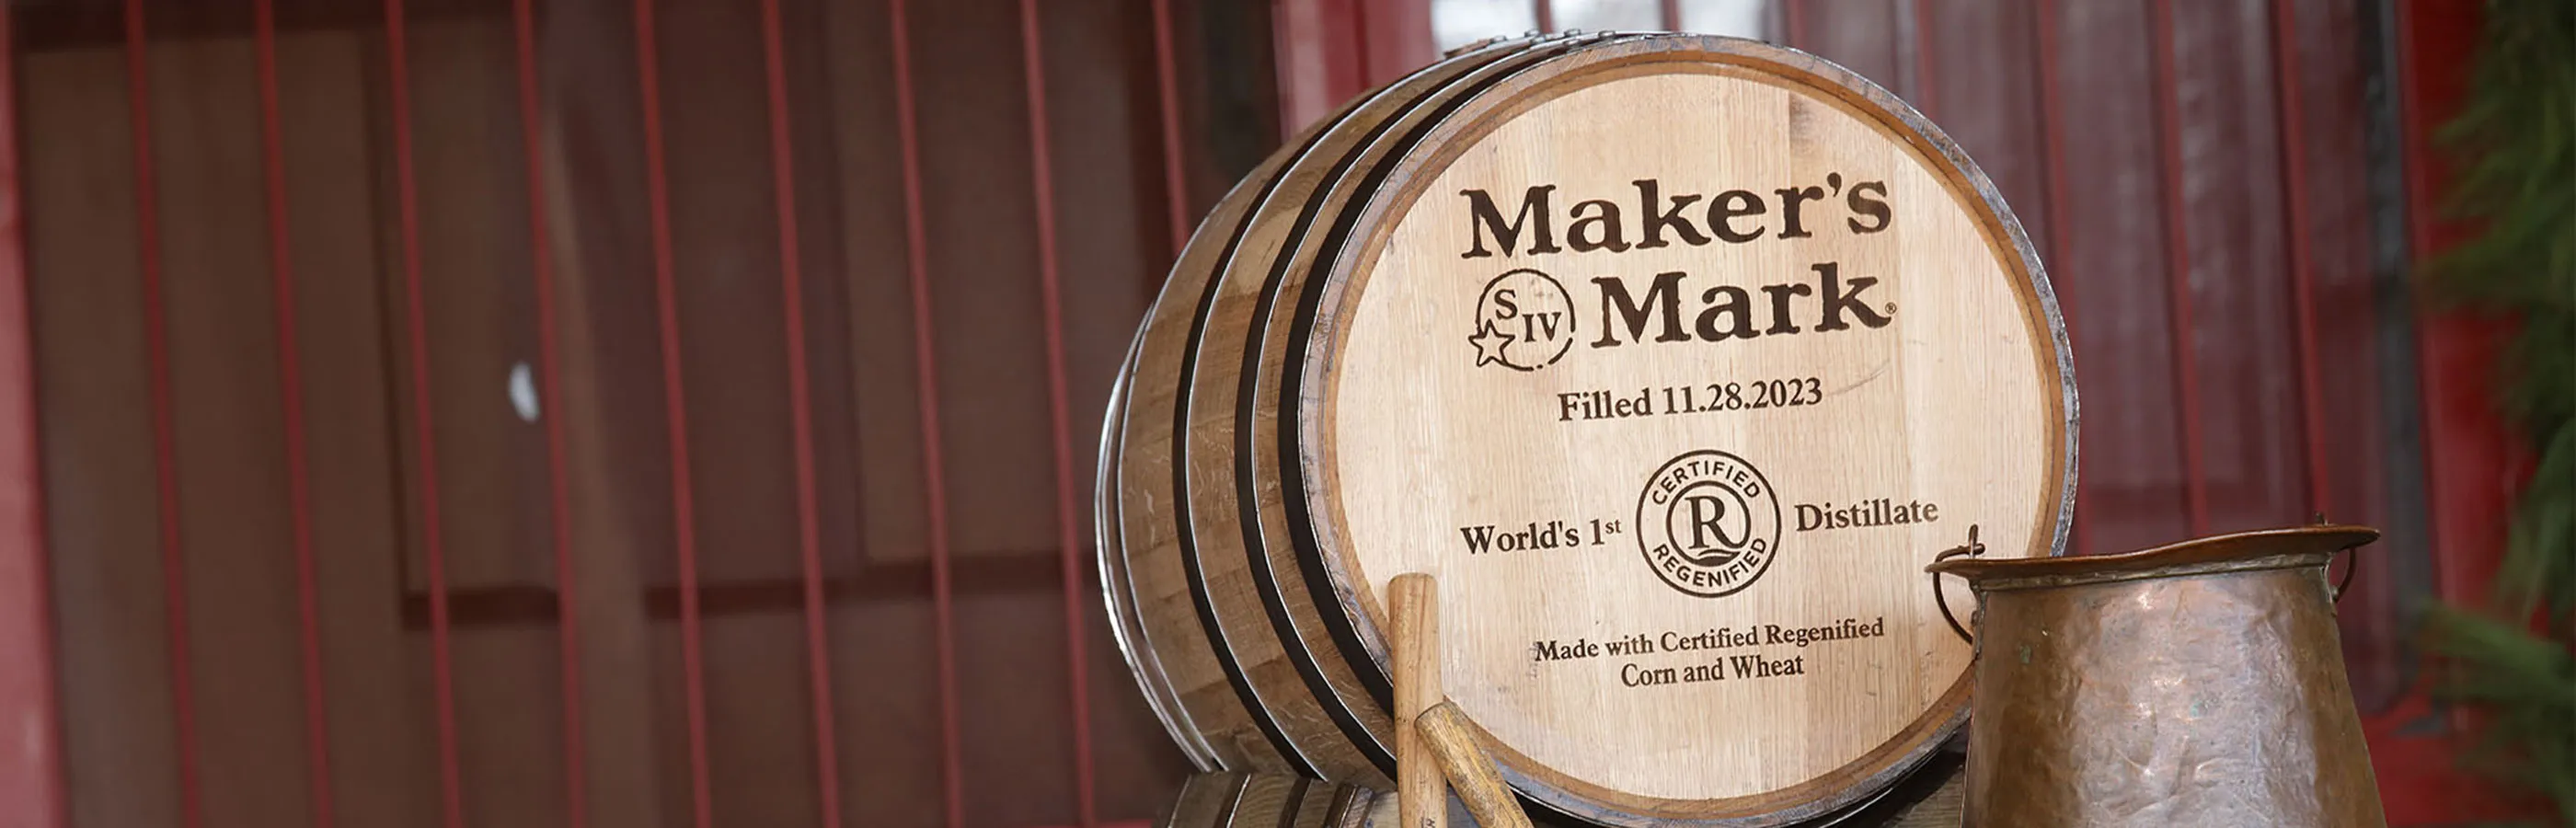 Maker’s Mark® Bourbon Advances its Pursuit of Flavor Through Nature With the Filling of its First Certified Regenified Barrel  